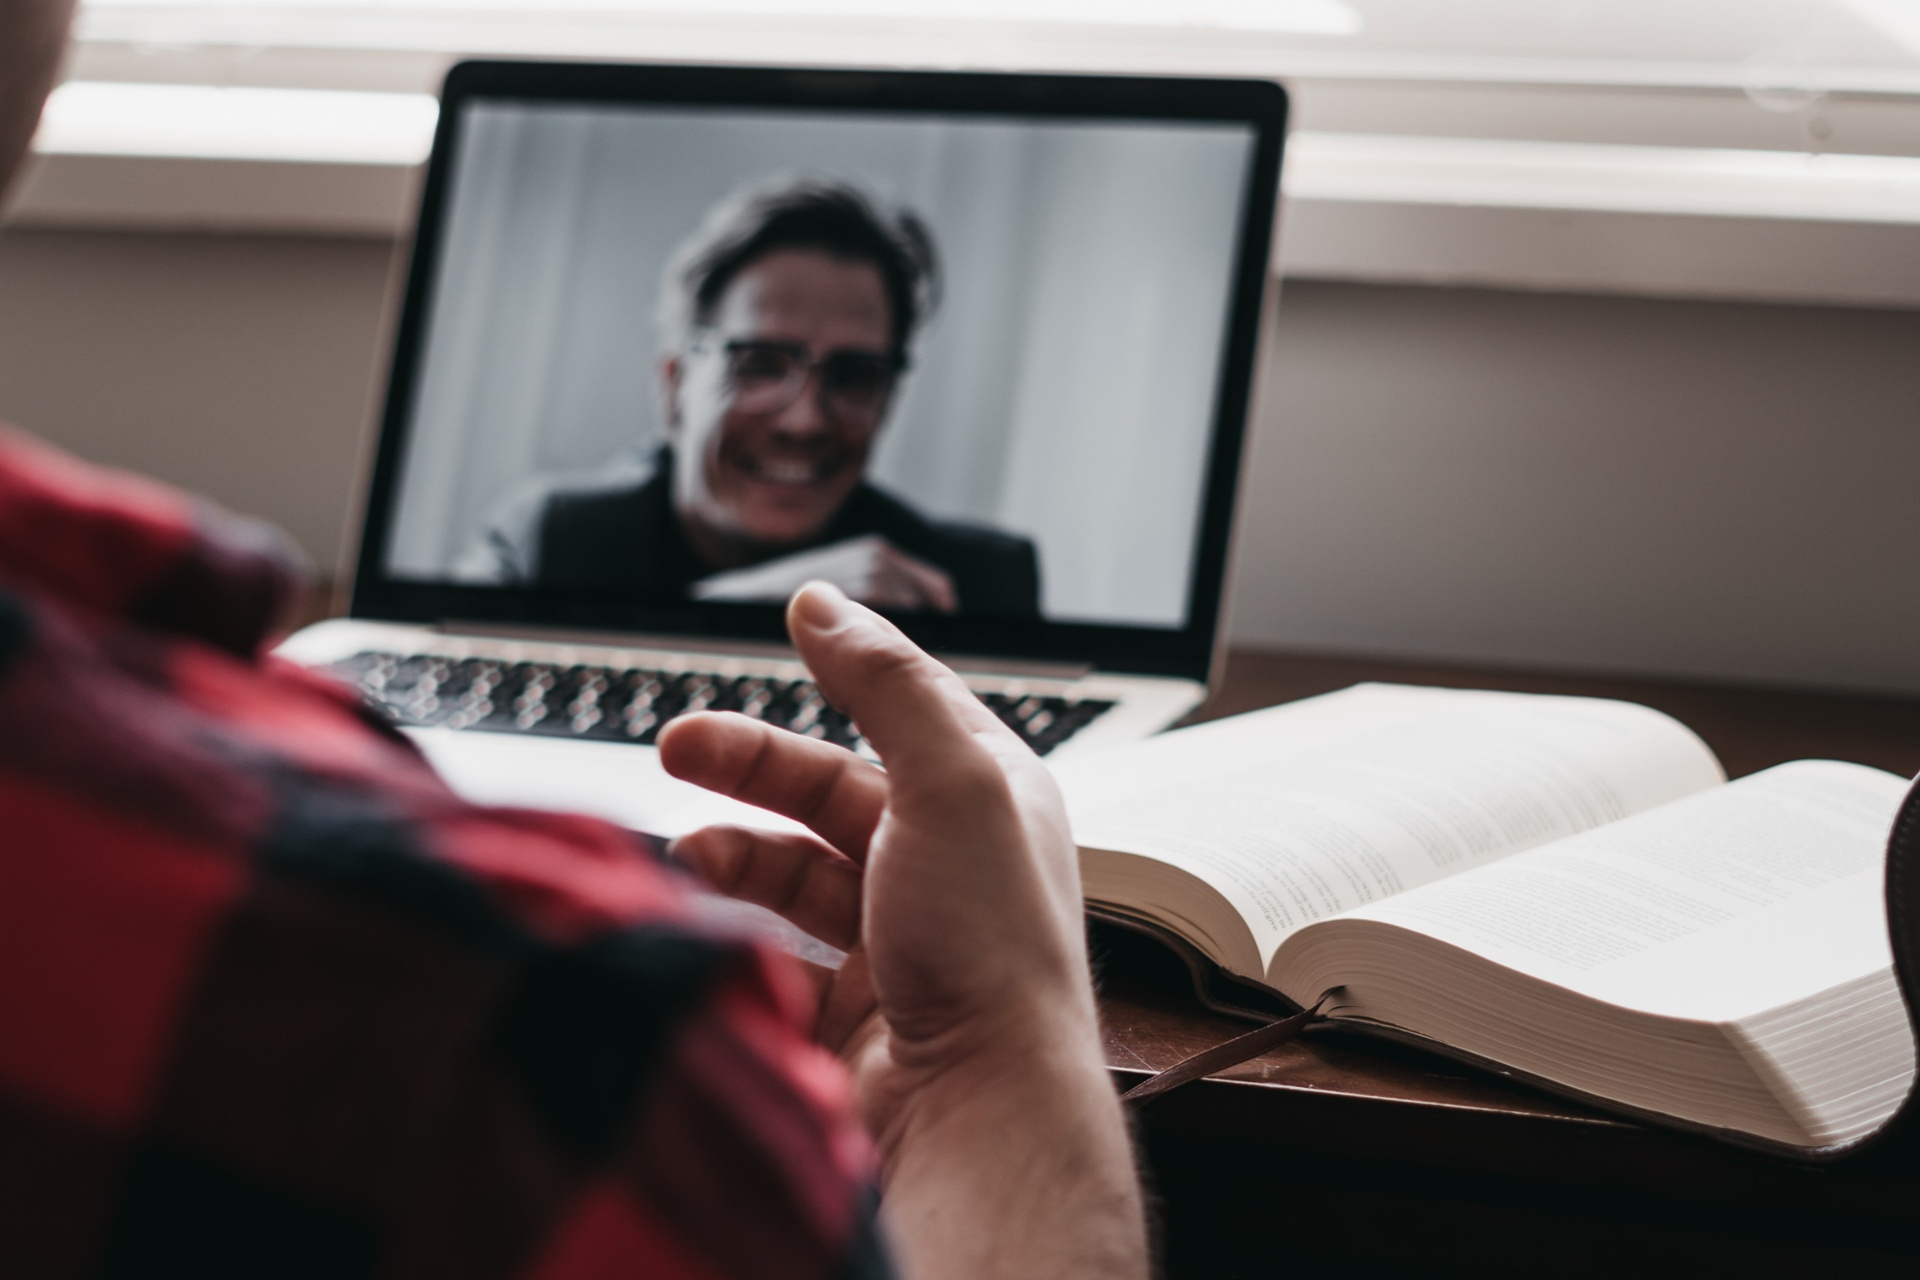 6 Components of Authentic Discipleship that Work Online